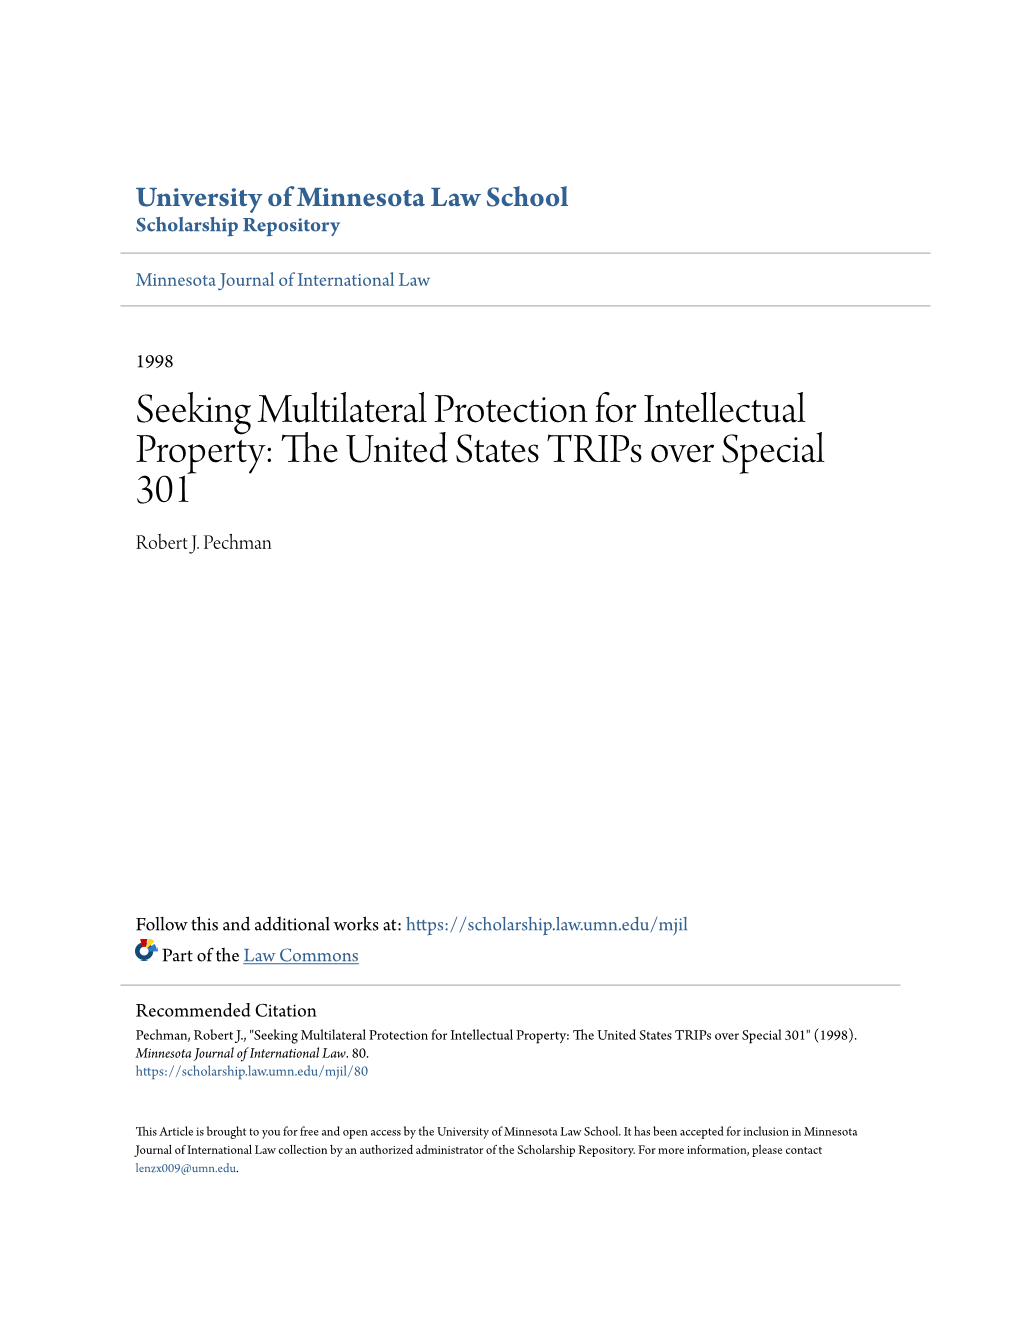 THE UNITED STATES TRIPS OVER SPECIAL 301 the United States Has Pursued a Clear Policy of Attempting to Secure Strong Intellectual Property Rights Worldwide